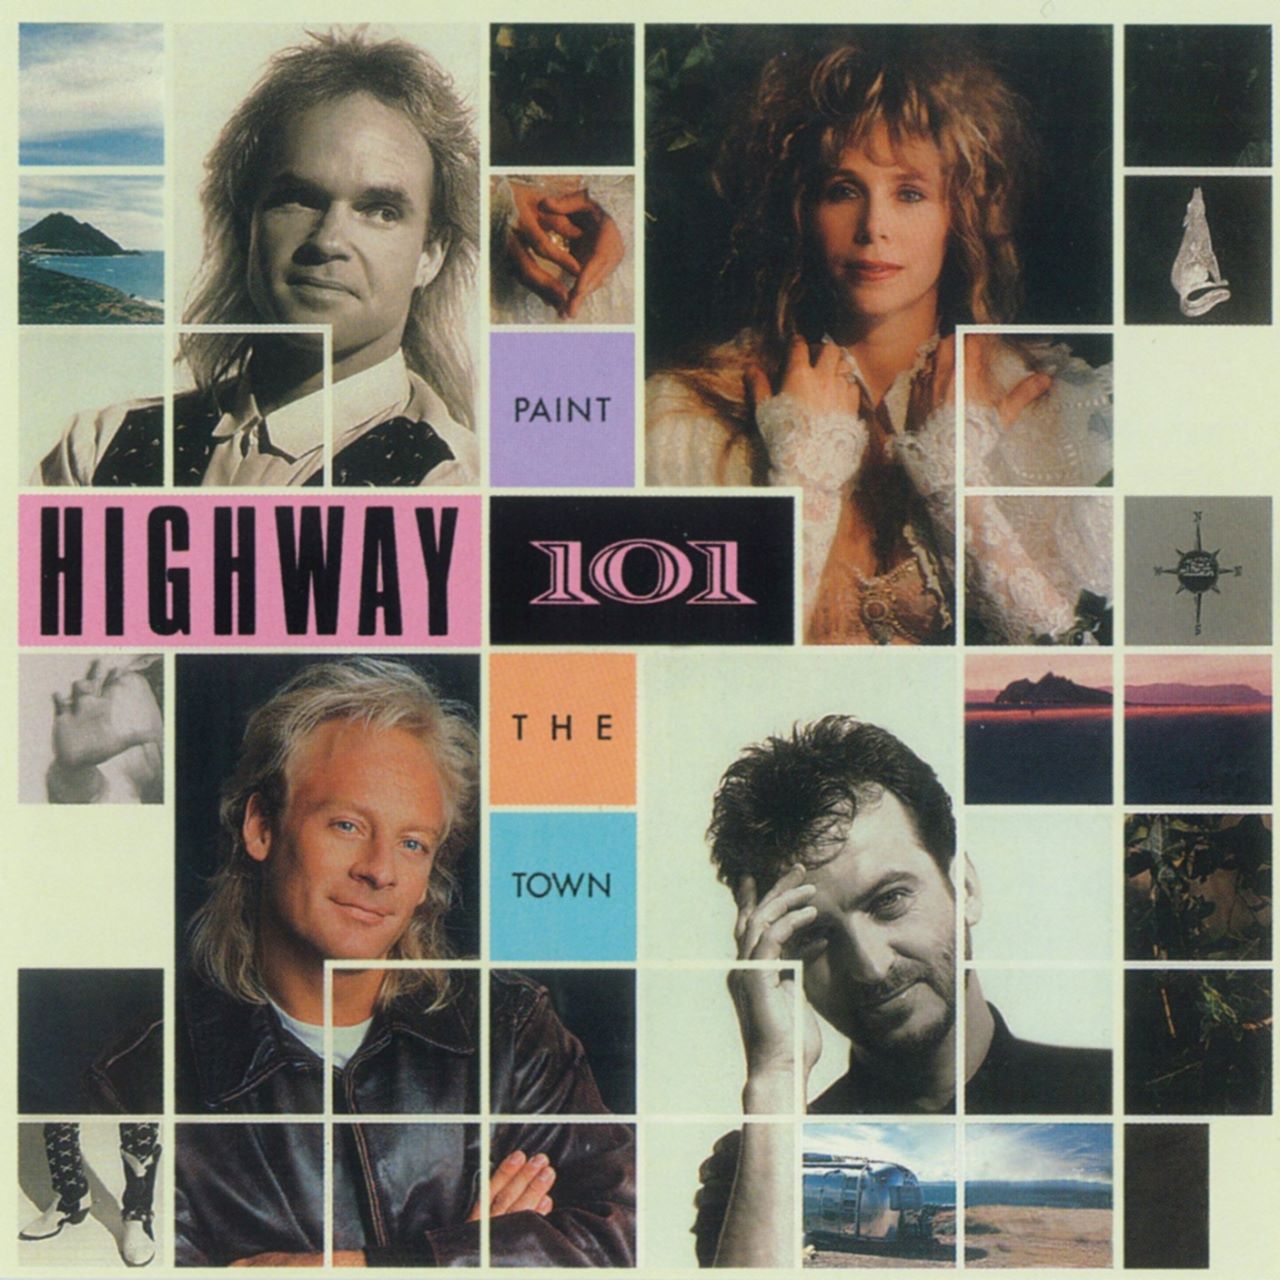 Highway 101 - Paint The Town cover album